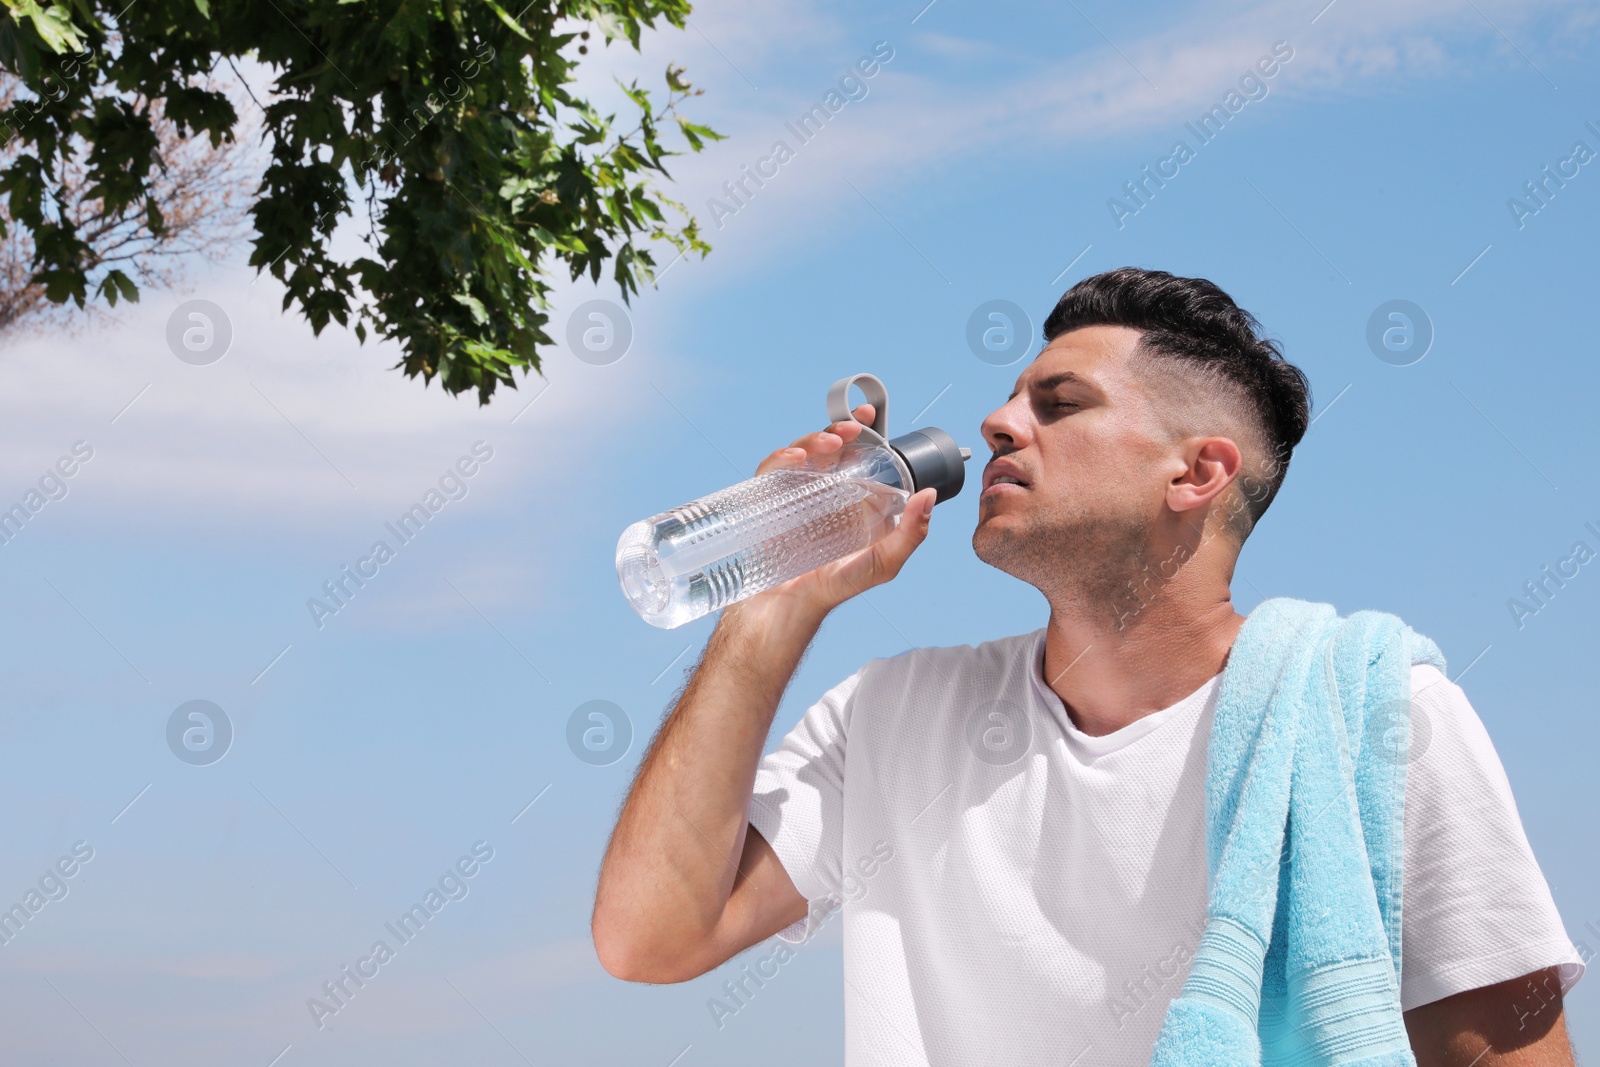 Photo of Man drinking water to prevent heat stroke outdoors